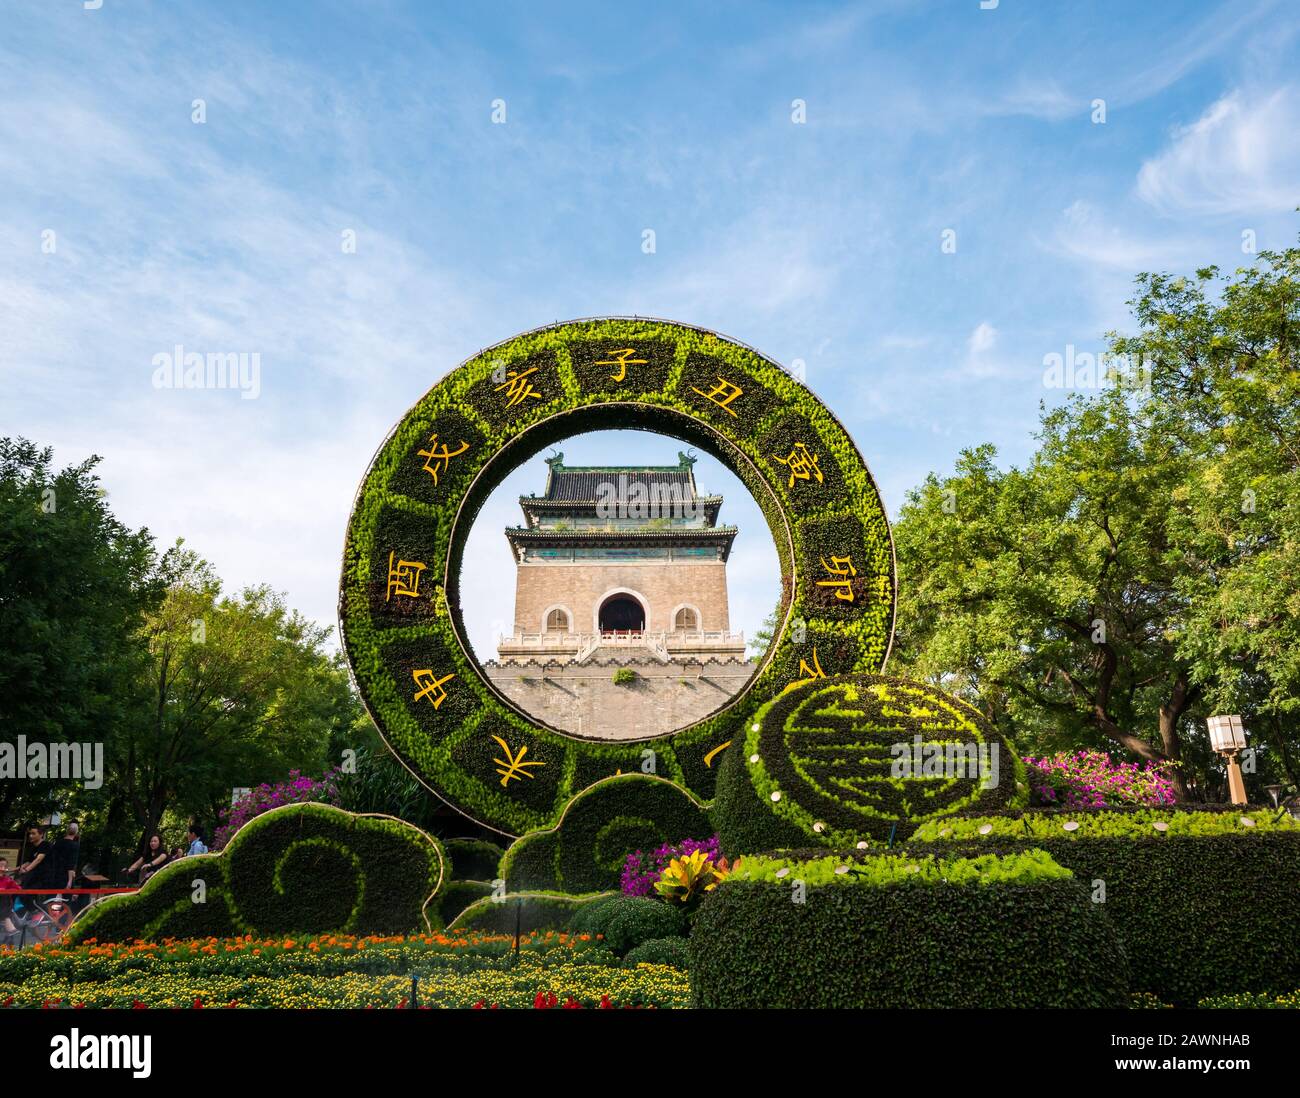 View of Bell Tower or Zhonglou framed though floral display,  Hutong District, Beijing, China, Asia Stock Photo